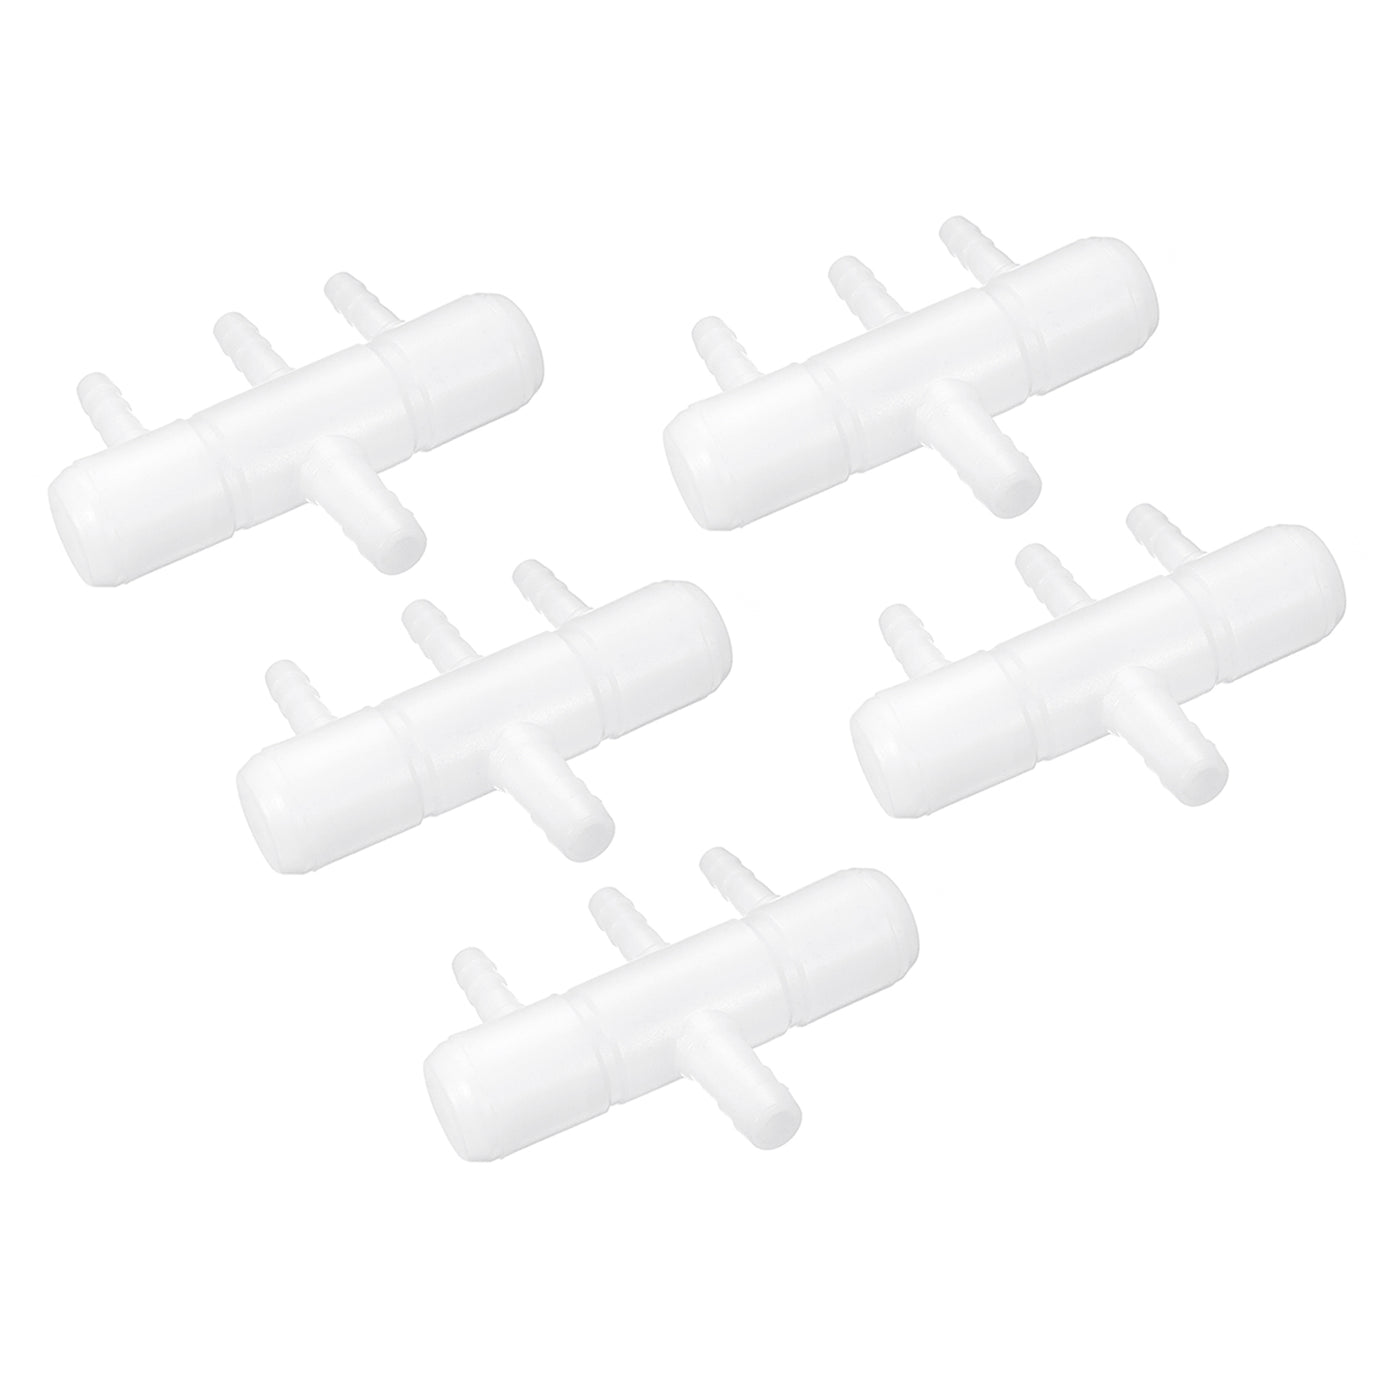 uxcell Uxcell Air Line Tubing Splitter Connector, 5Pcs 8mm/0.31" to 5mm/0.2" 3 Way, White